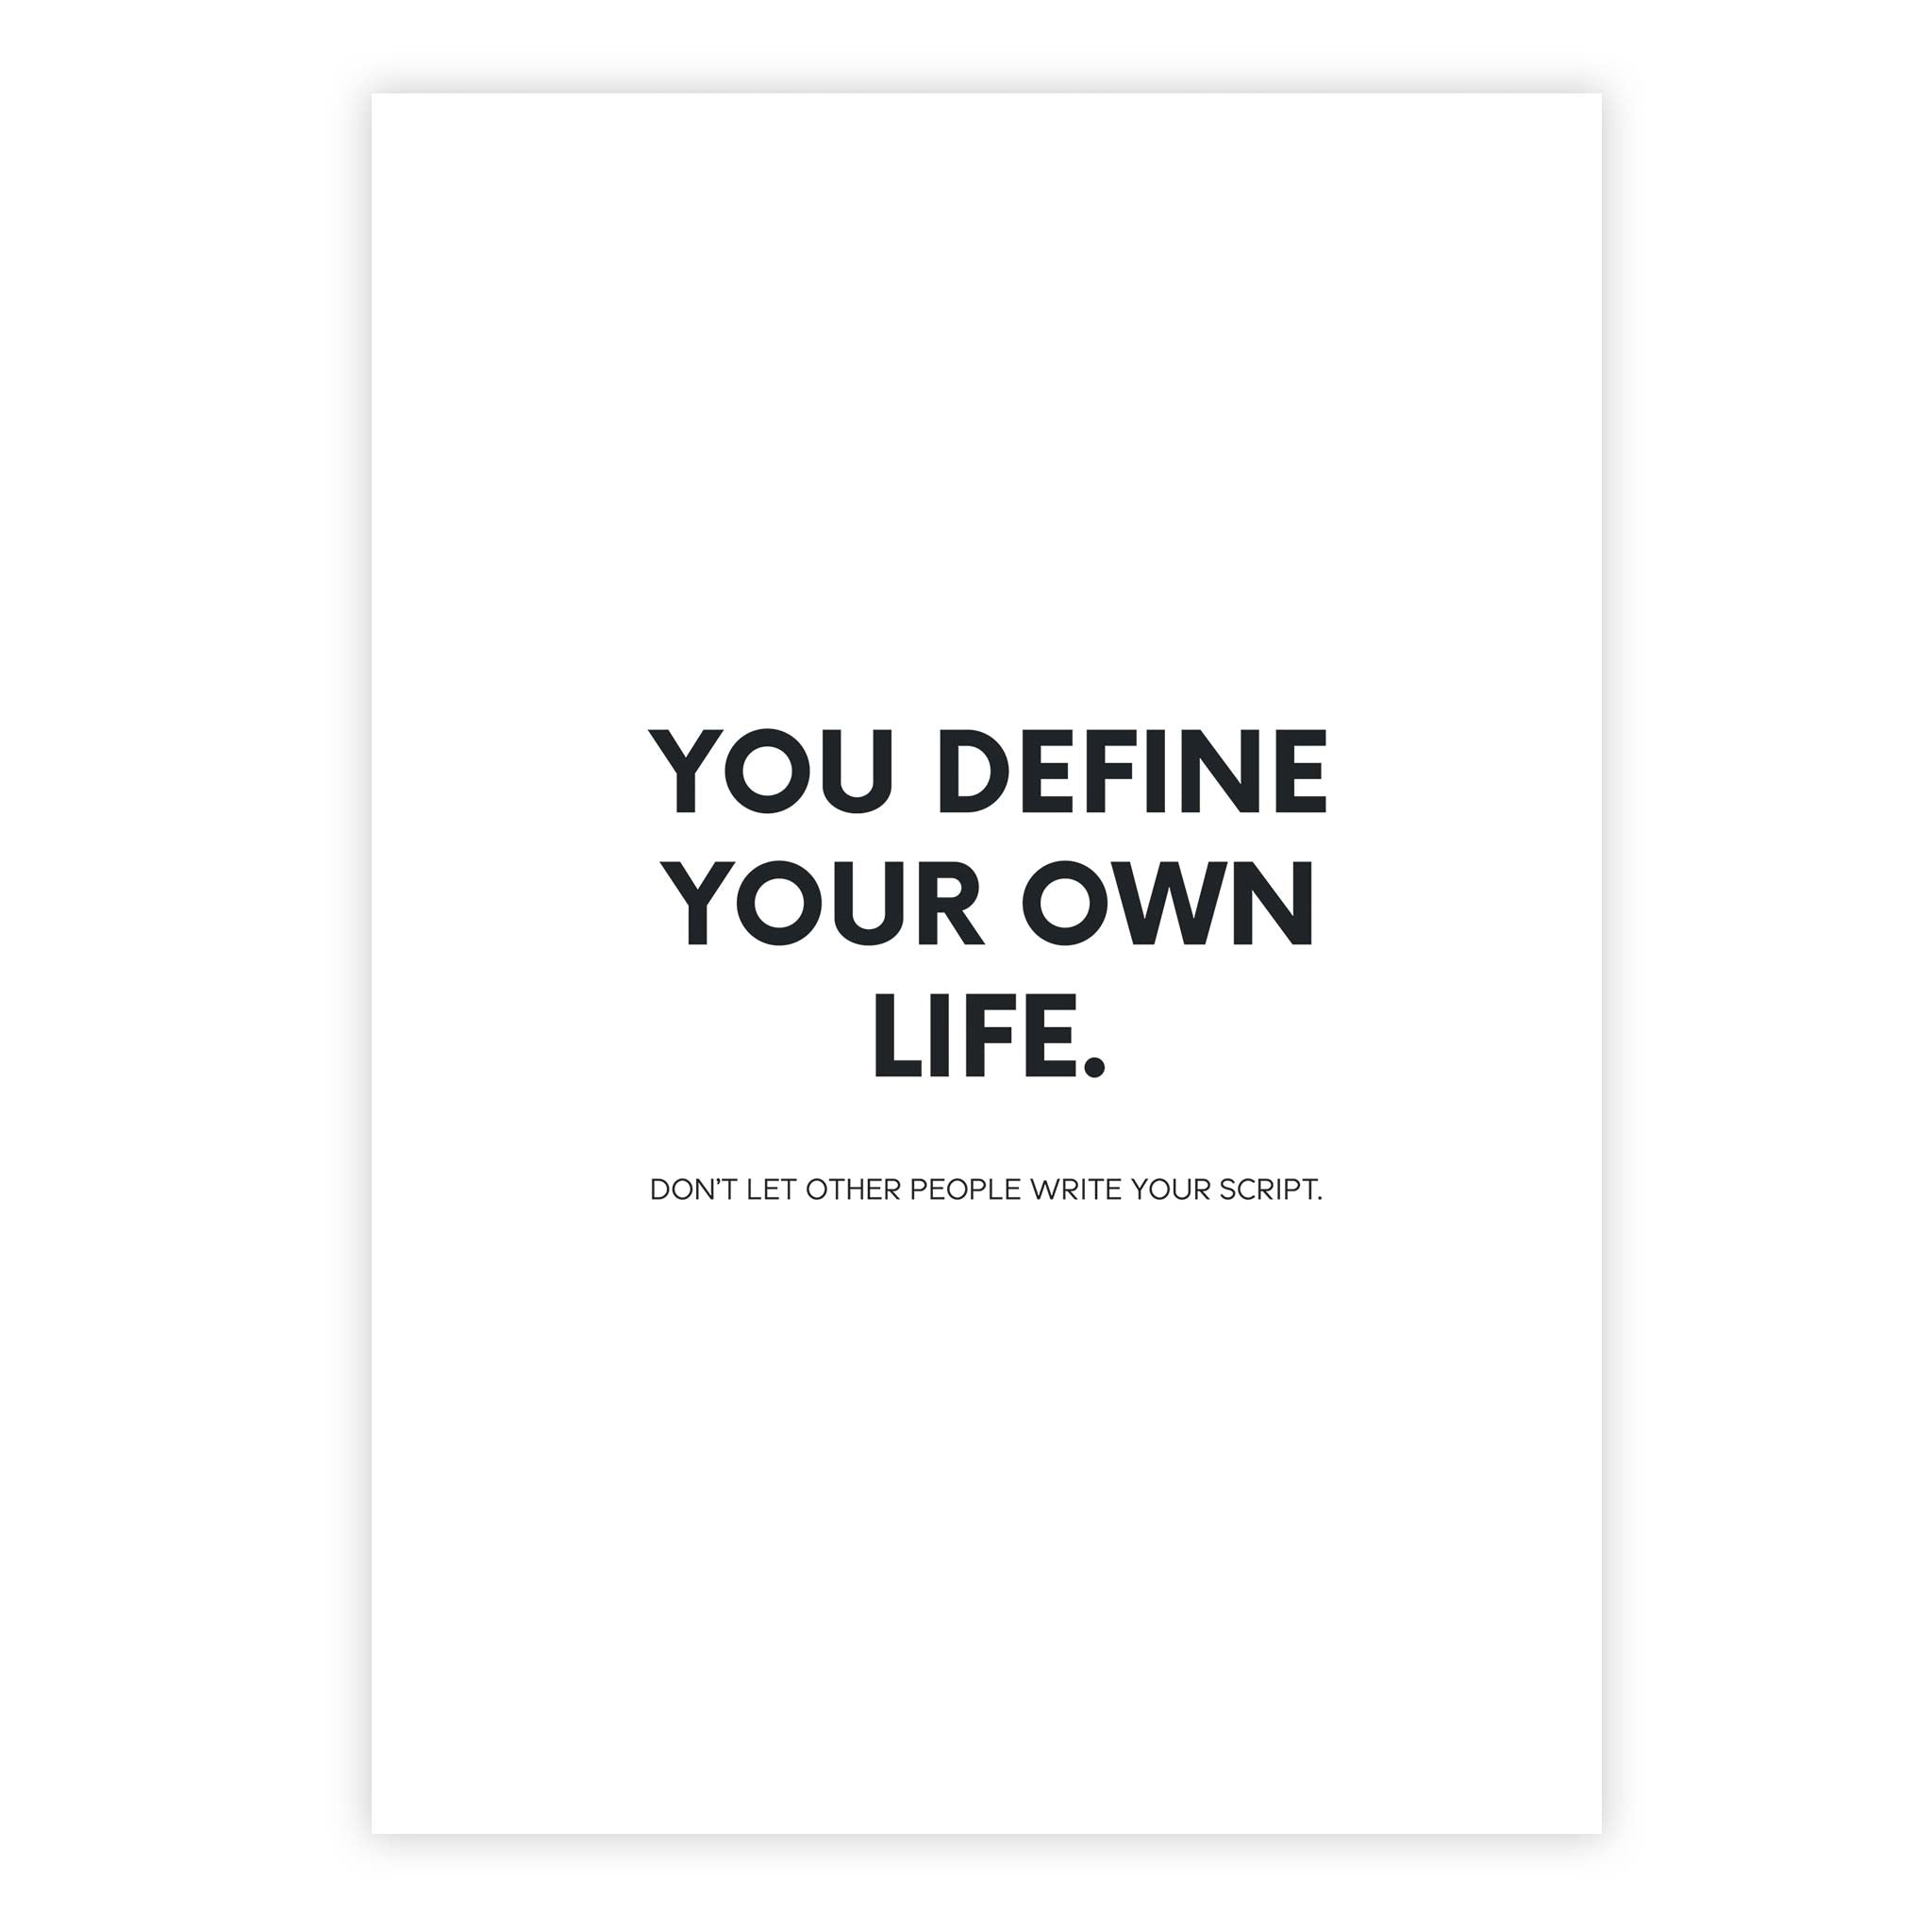 You define your own life. Don’t let other people write your script